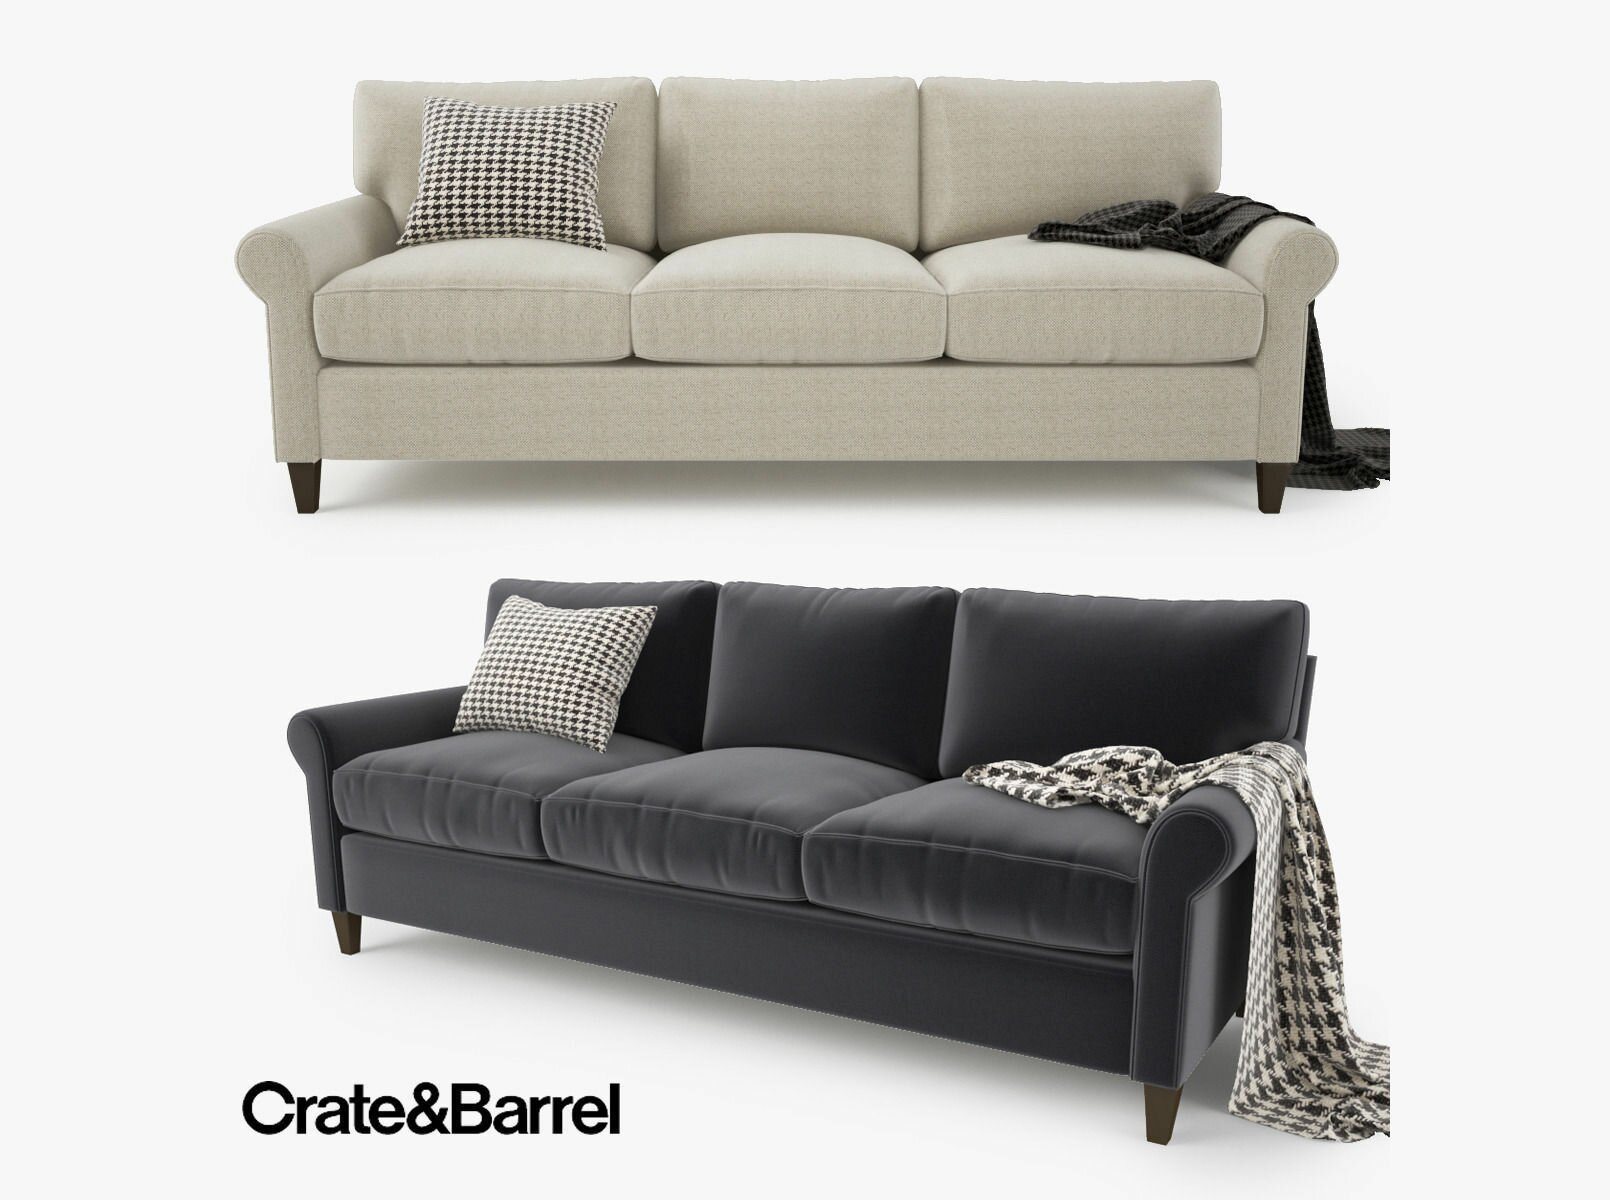 Simple But Elegant Tufted Sofa Design with Crate and Barrel Couch: Axis Sectional Sofa | Crate And Barrel Couch Covers | Crate And Barrel Couch